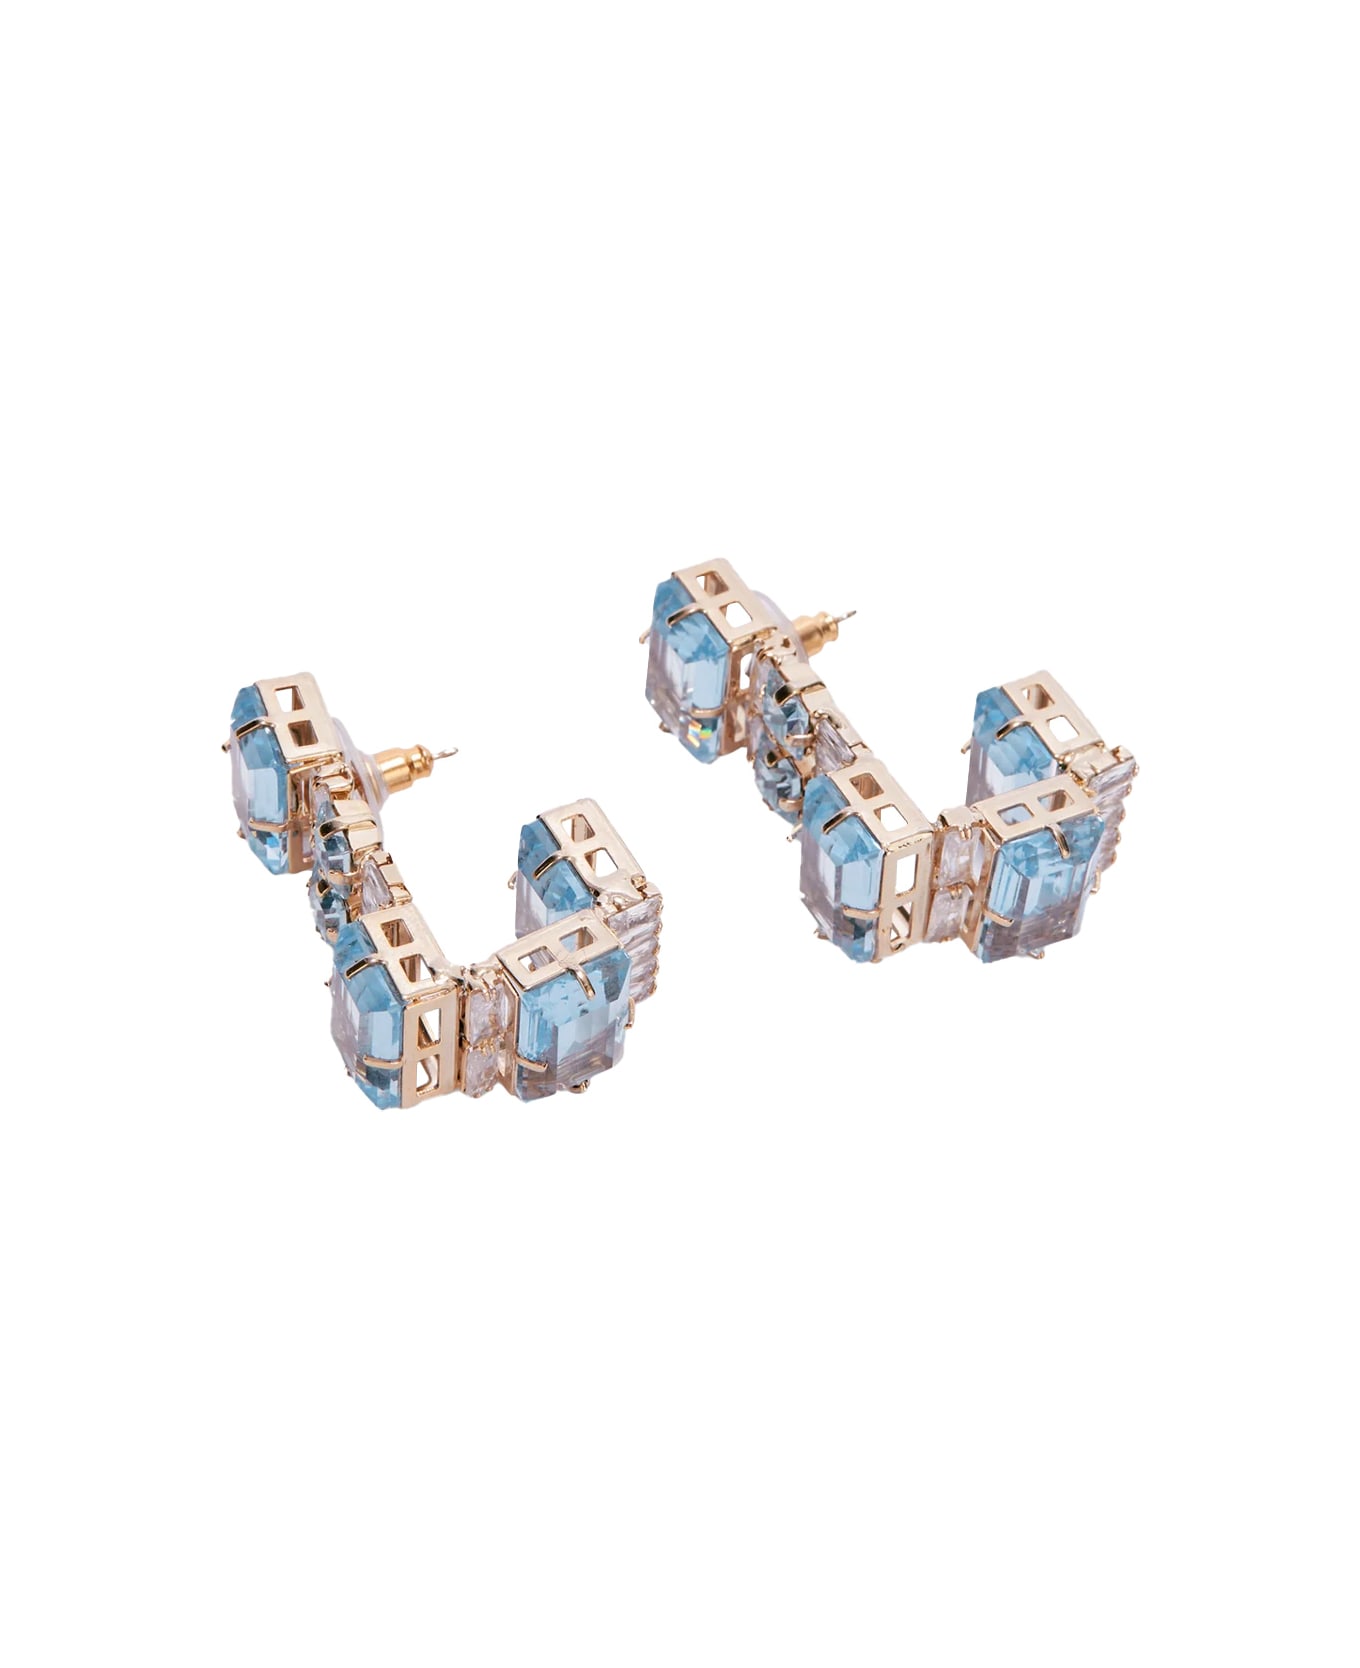 Ermanno Scervino Earrings With Light Blue Stones - Blue